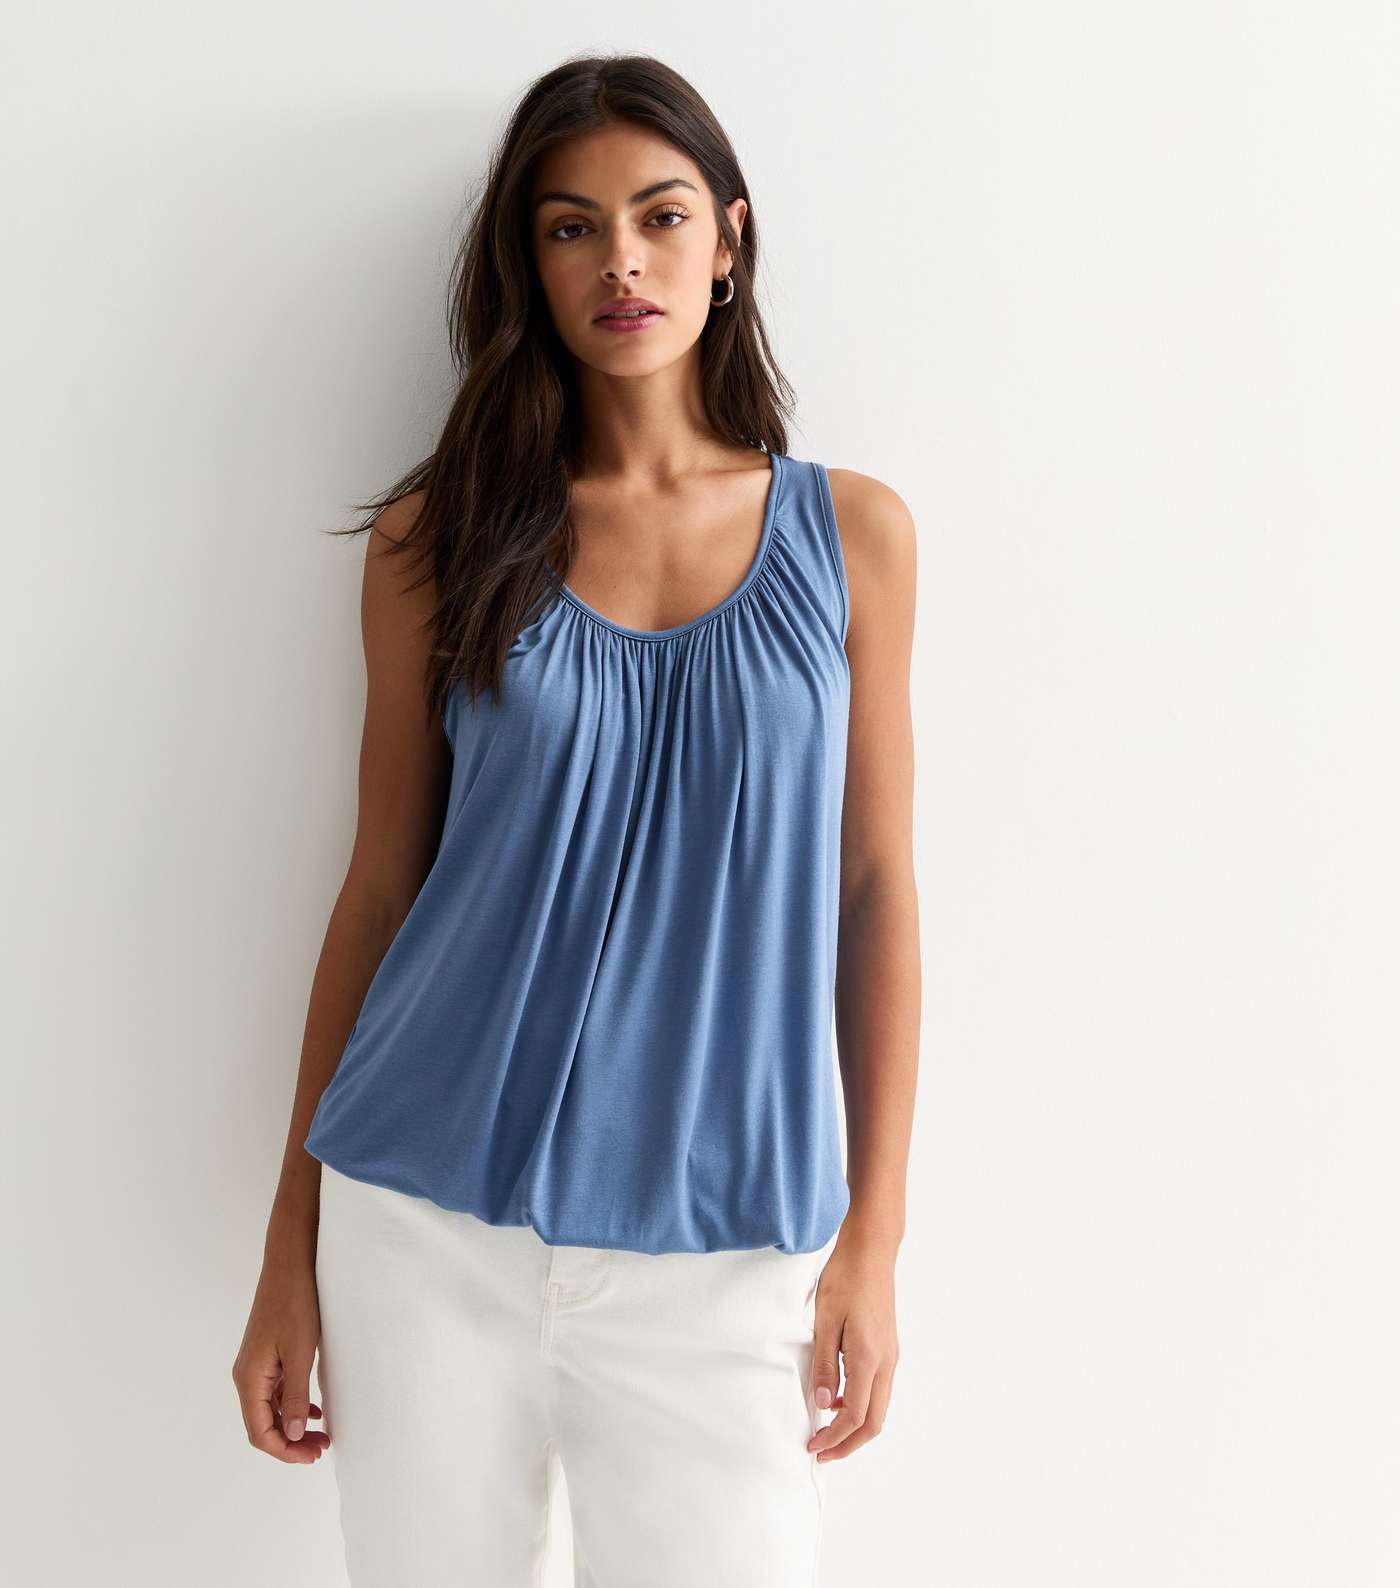 Gini London Pale Blue Oversized Top Image 2